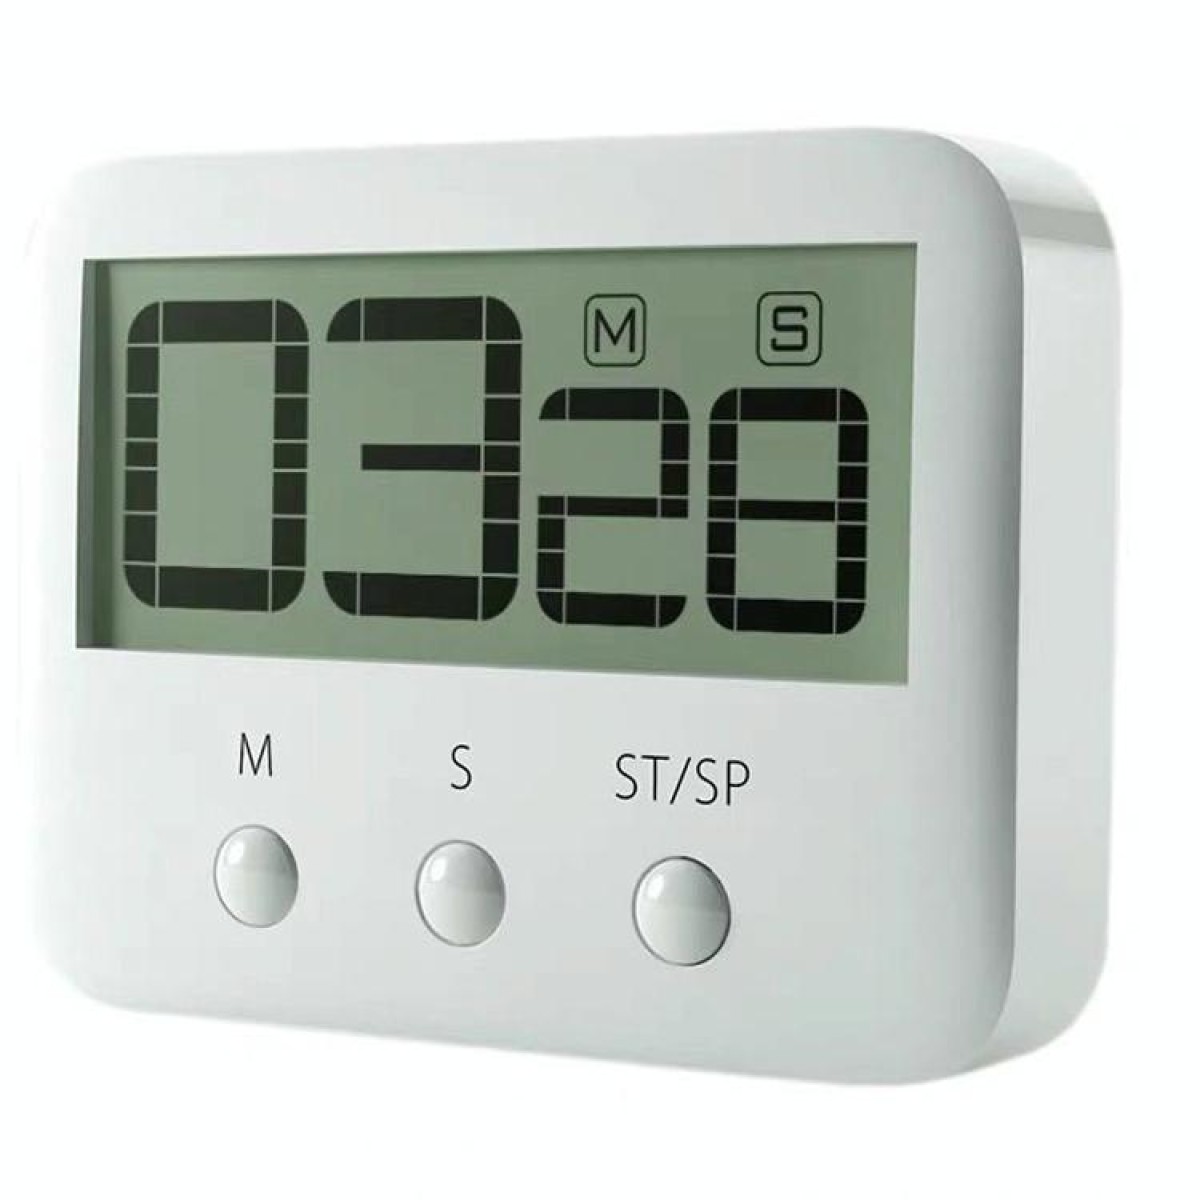 118S LCD Digital Display Countdown Timer Large Screen Kitchen Timer(White)